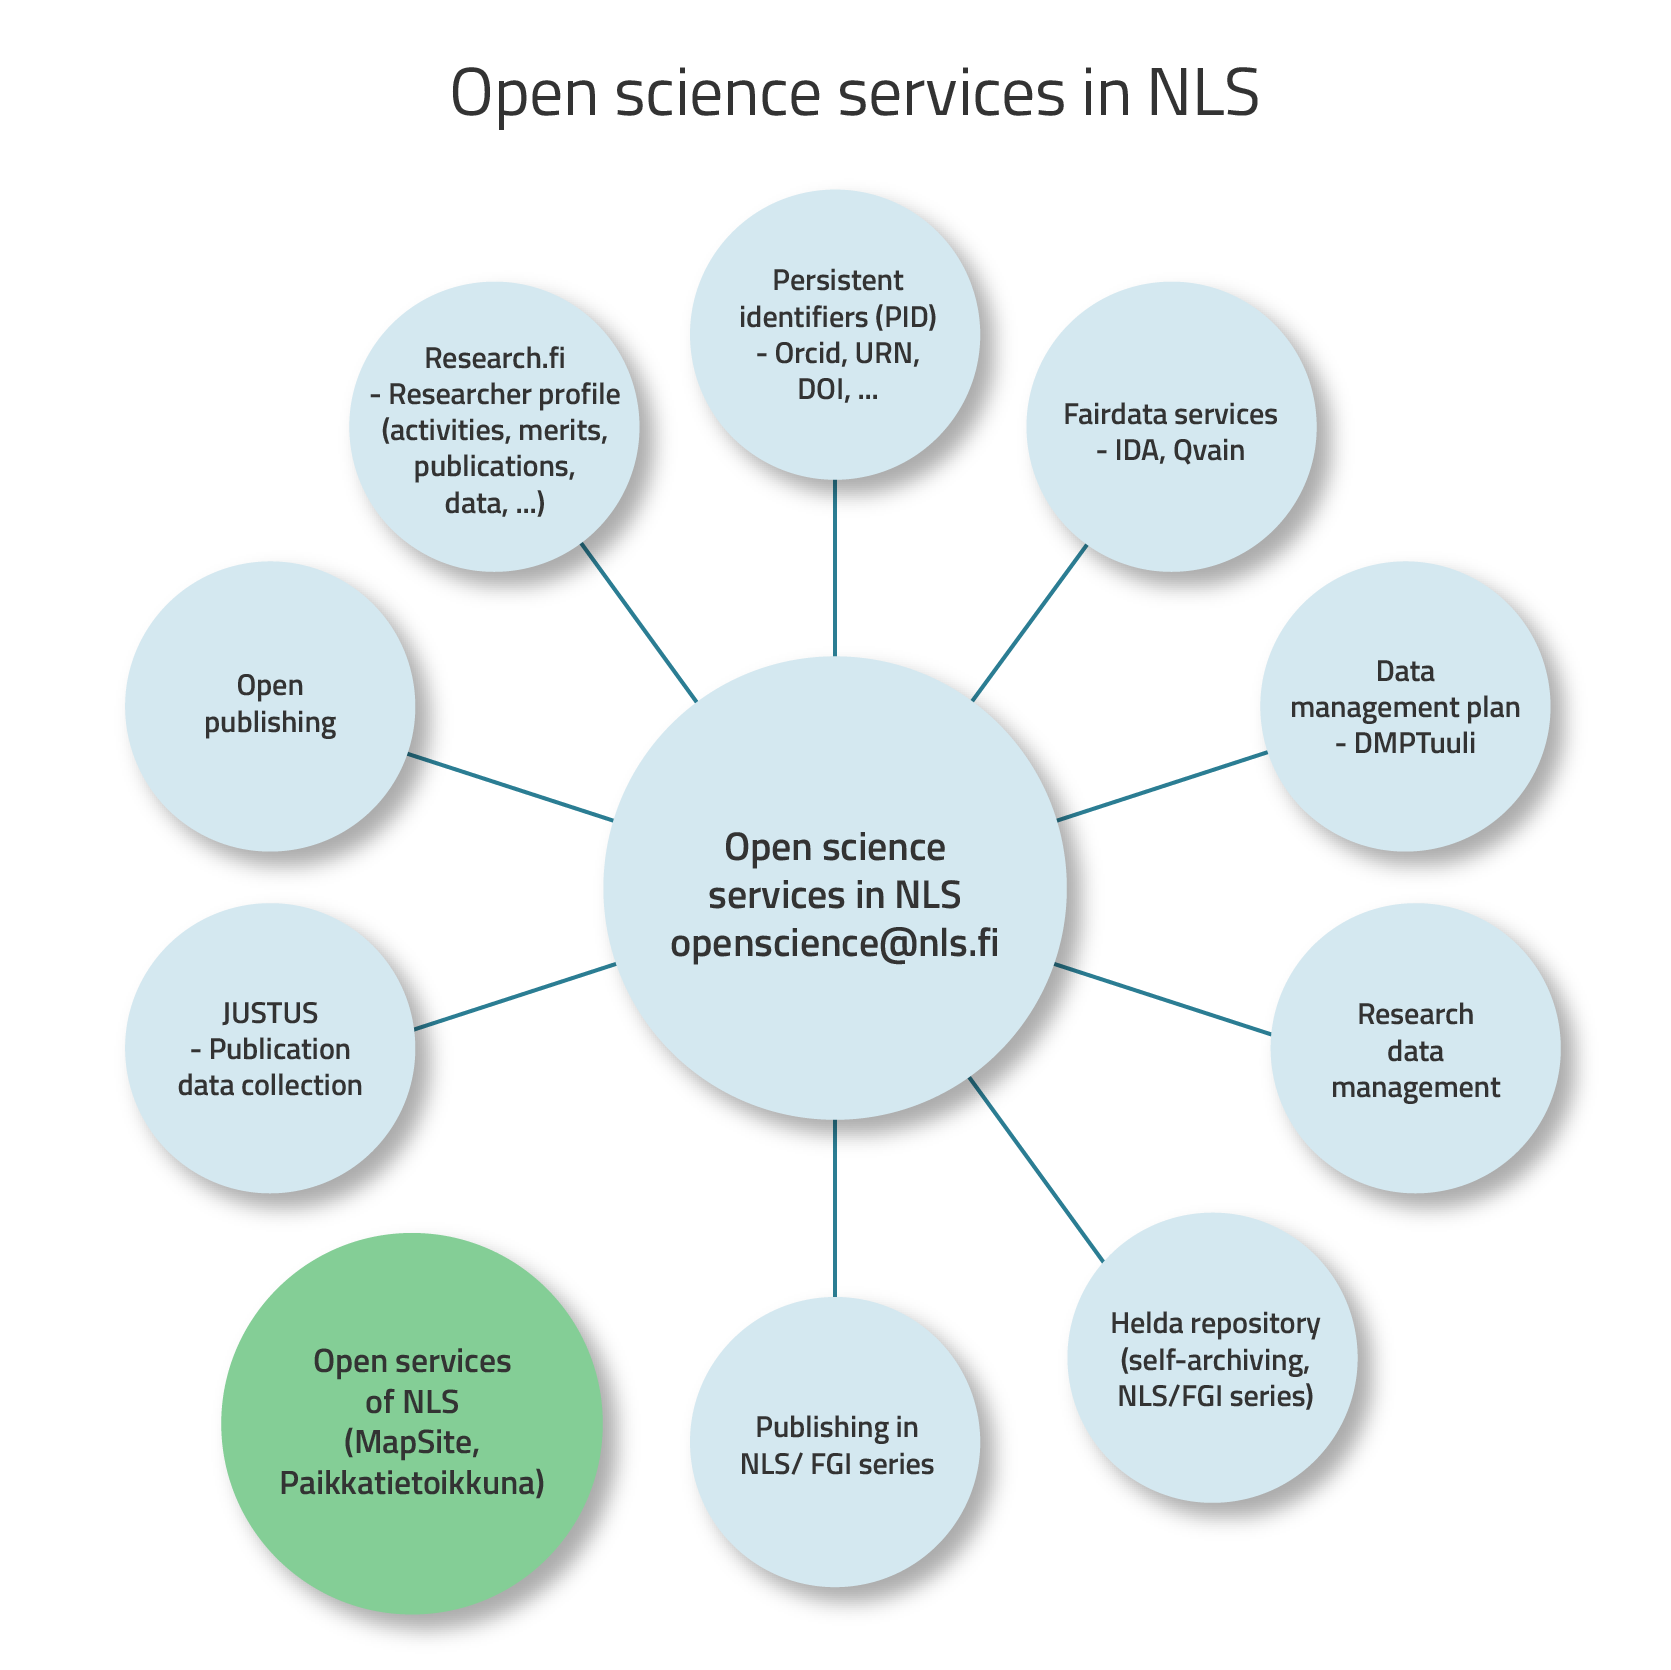 Open science services of National Land Survey of Finland in one picture. These are:  Persistent identifiers (PID), Fairdata services, Data management plan, Helda repository, Publishing in NLS, JUSTUS Publication data collection, Open publishing, Research.fi. NLS’s open data (MapSite, Paikkatietoikkuna) are also mentioned in the picture.